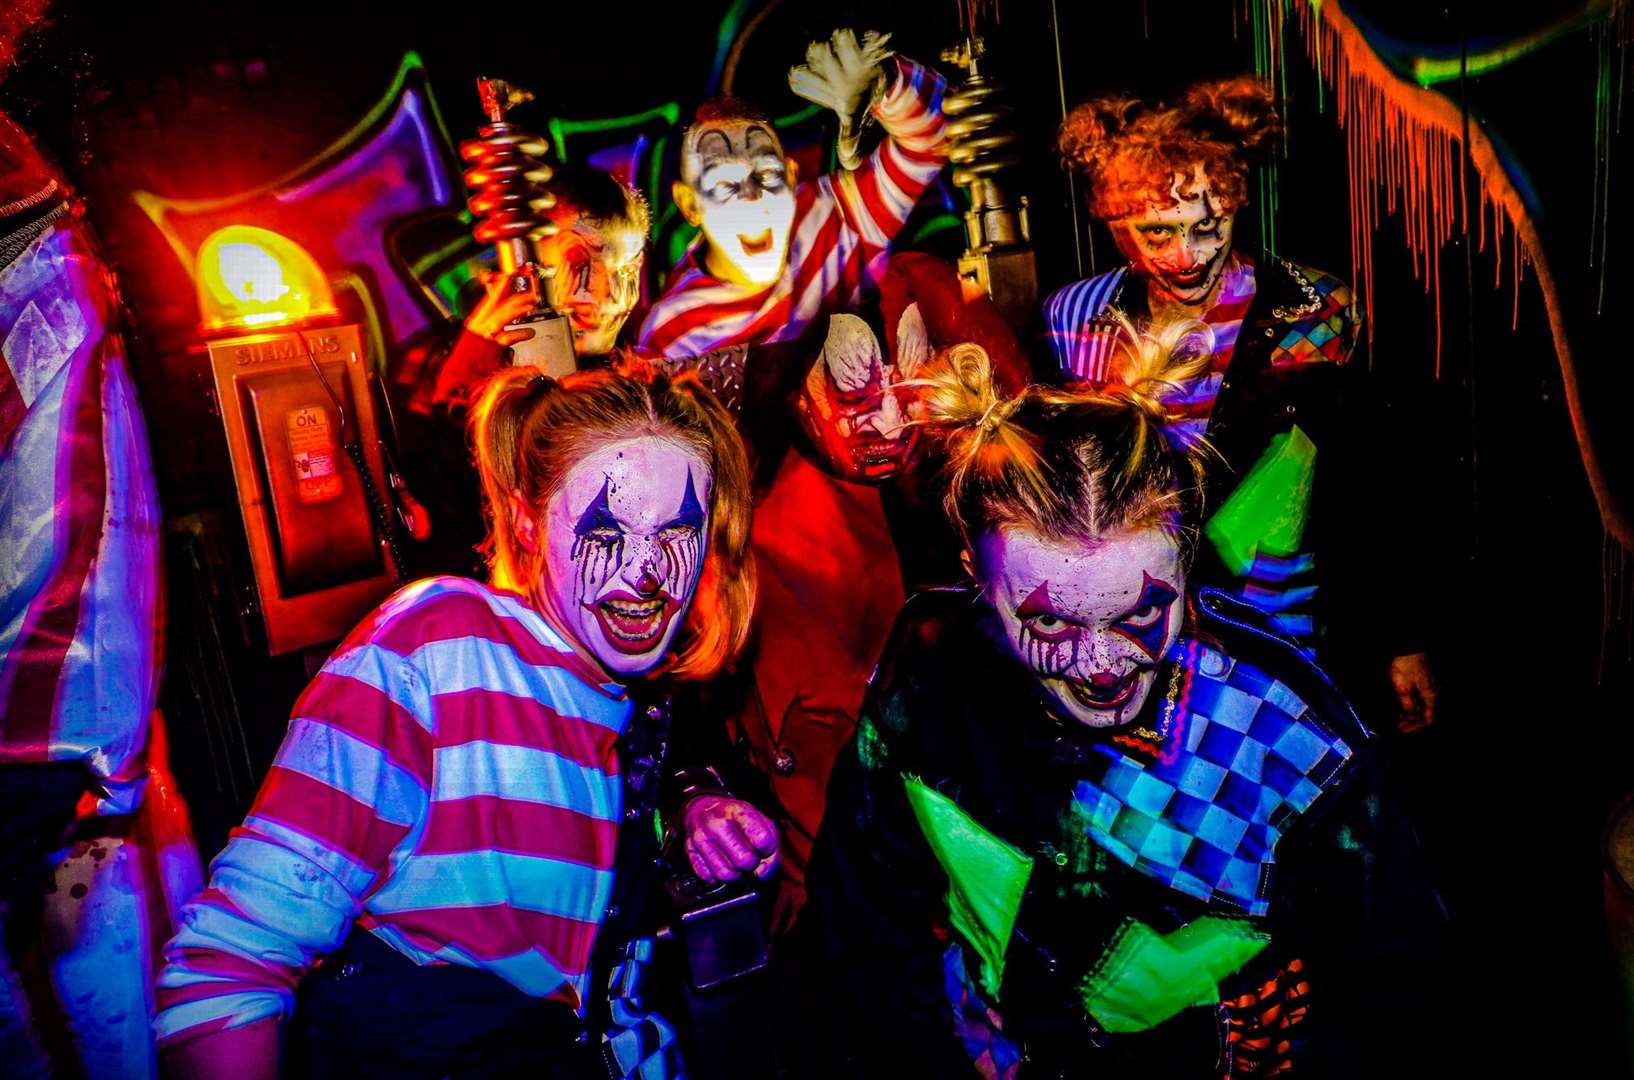 Shocktober Fest is one of the UK’s largest and most popular scare attractions. Picture: Tulleys